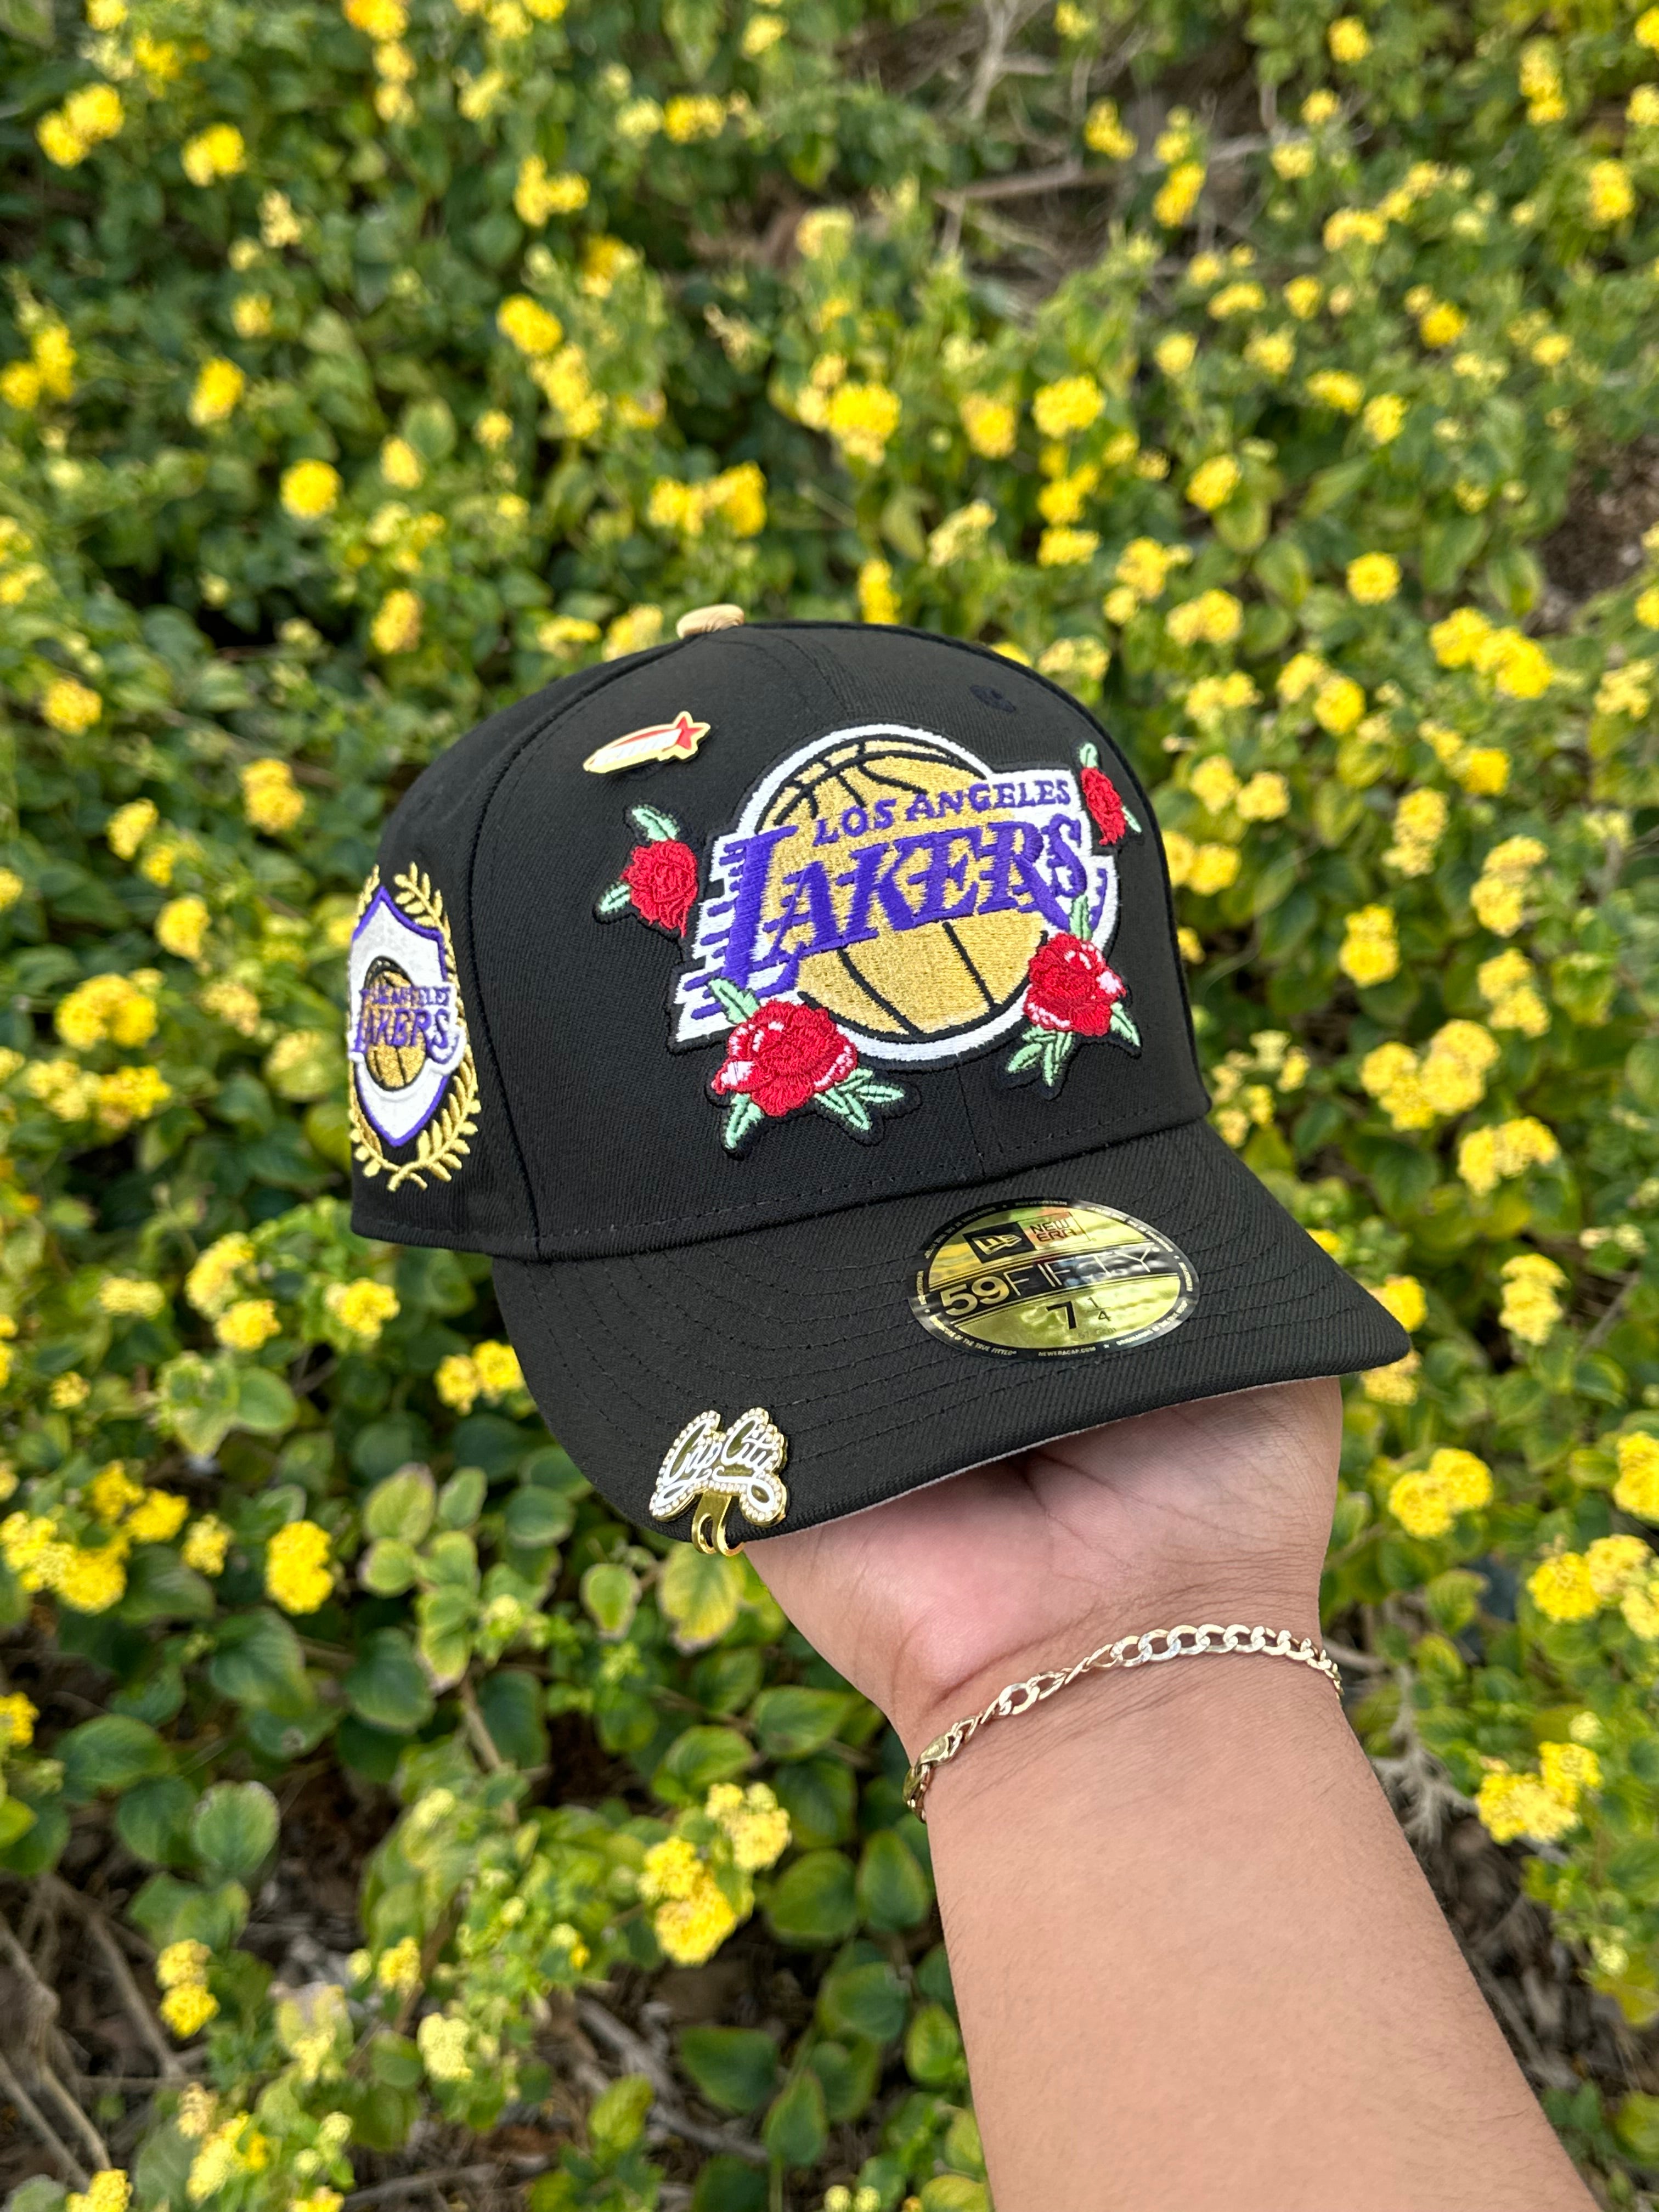 NEW ERA EXCLUSIVE 59FIFTY BLACK LOS ANGELES LAKERS W/ ROSES + LAKERS LOGO SIDE PATCH